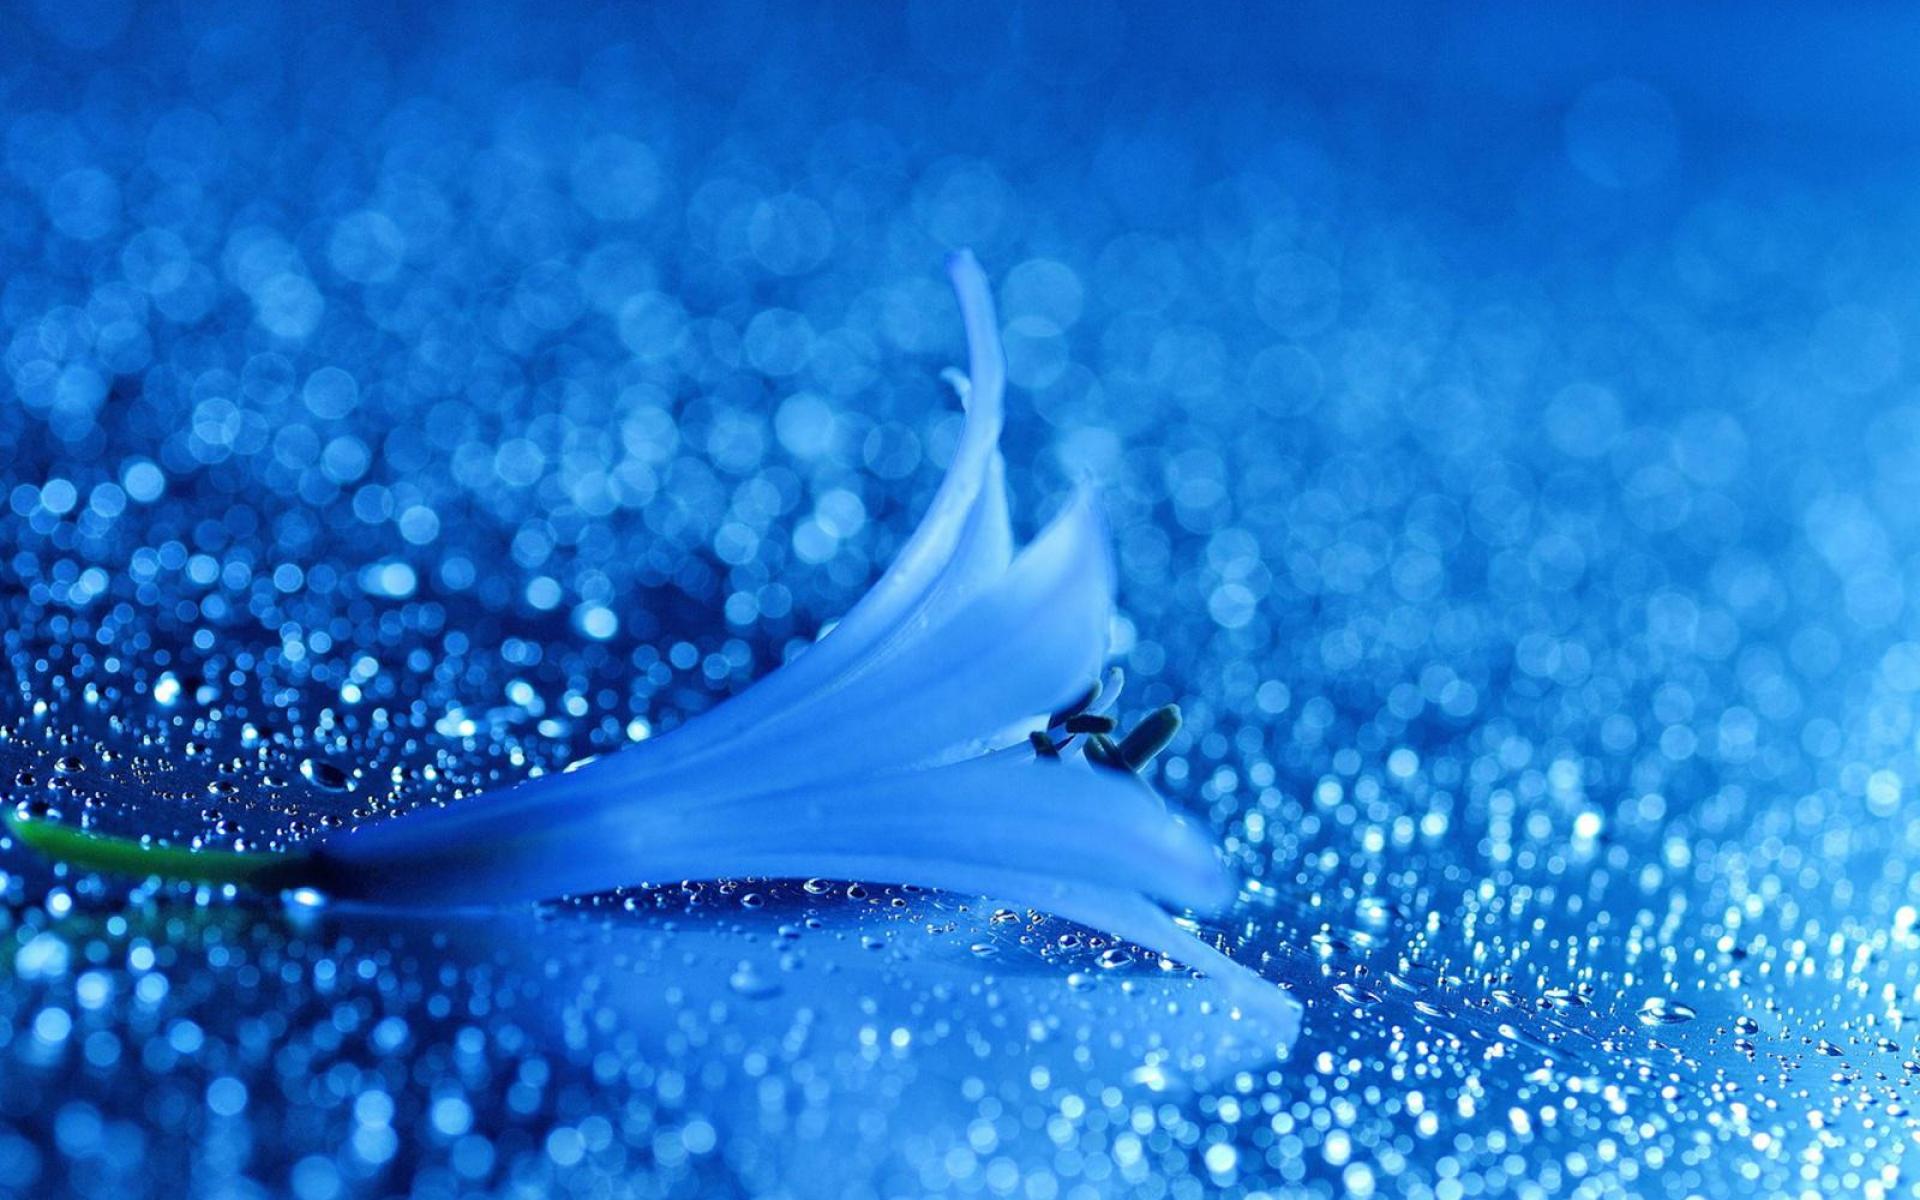  under the blue wallpapers category of free hd wallpapers pretty blue